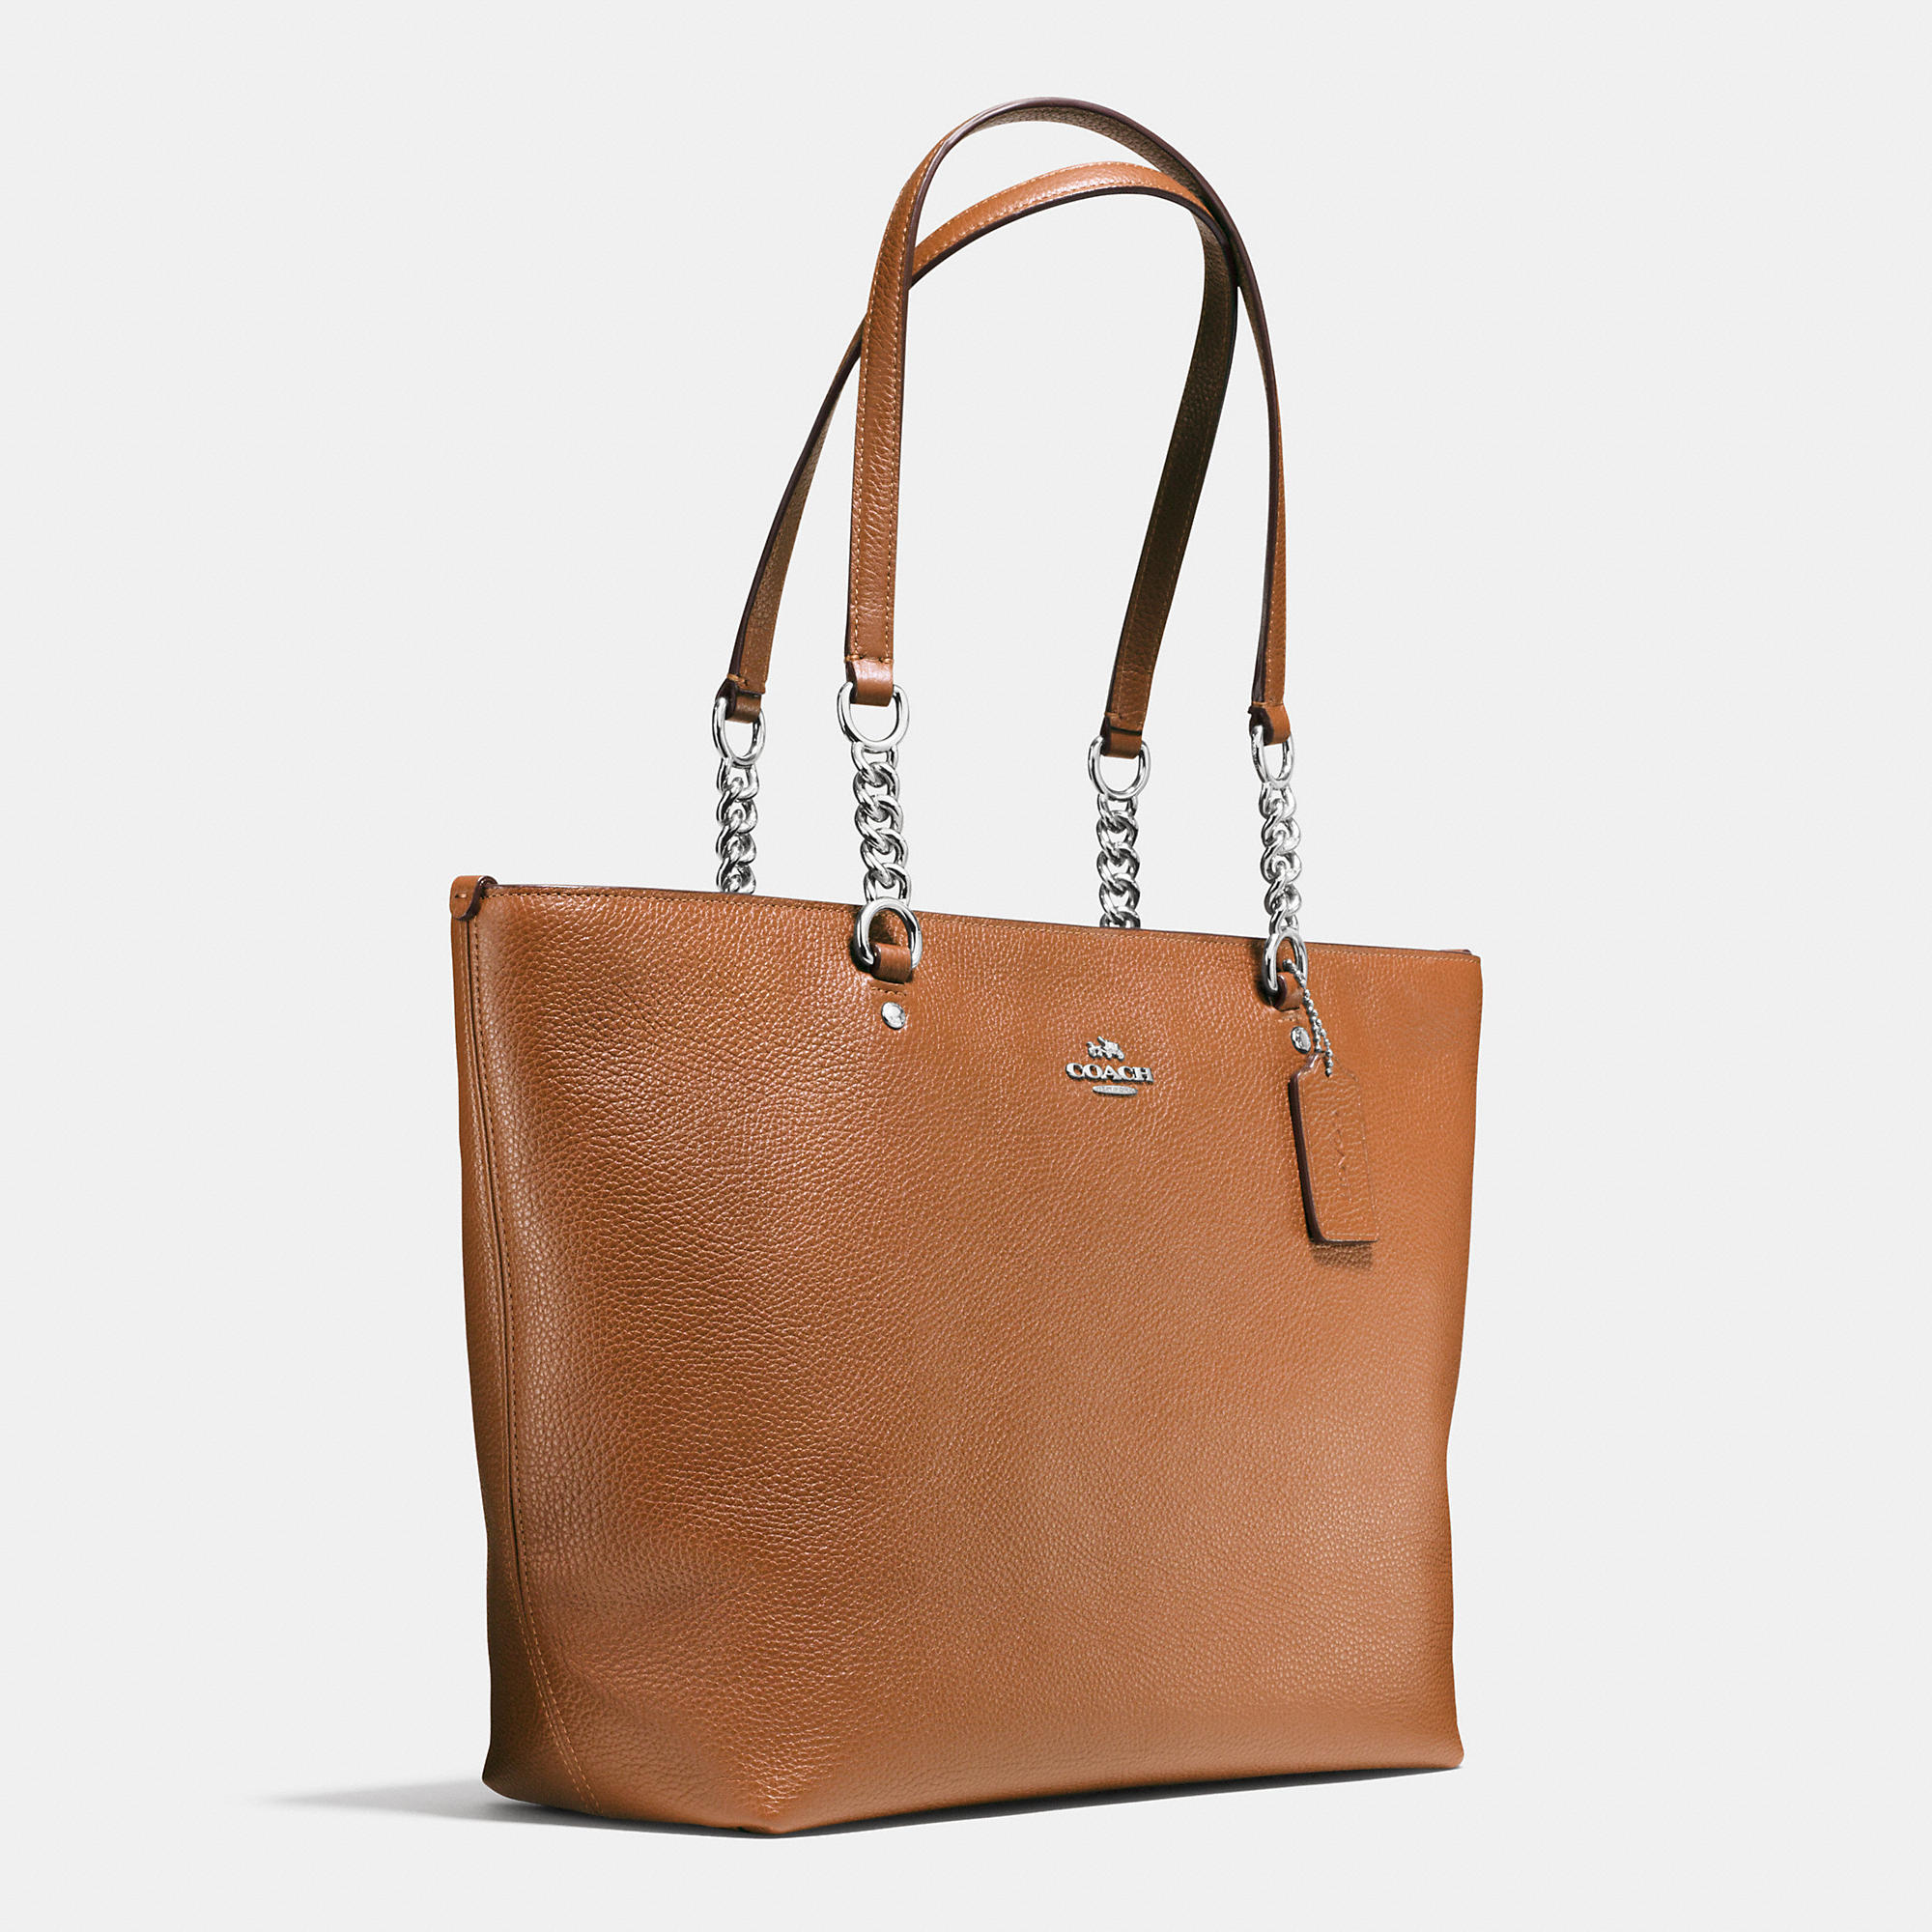 Lady Beloved Coach Sophia Tote In Pebble Leather